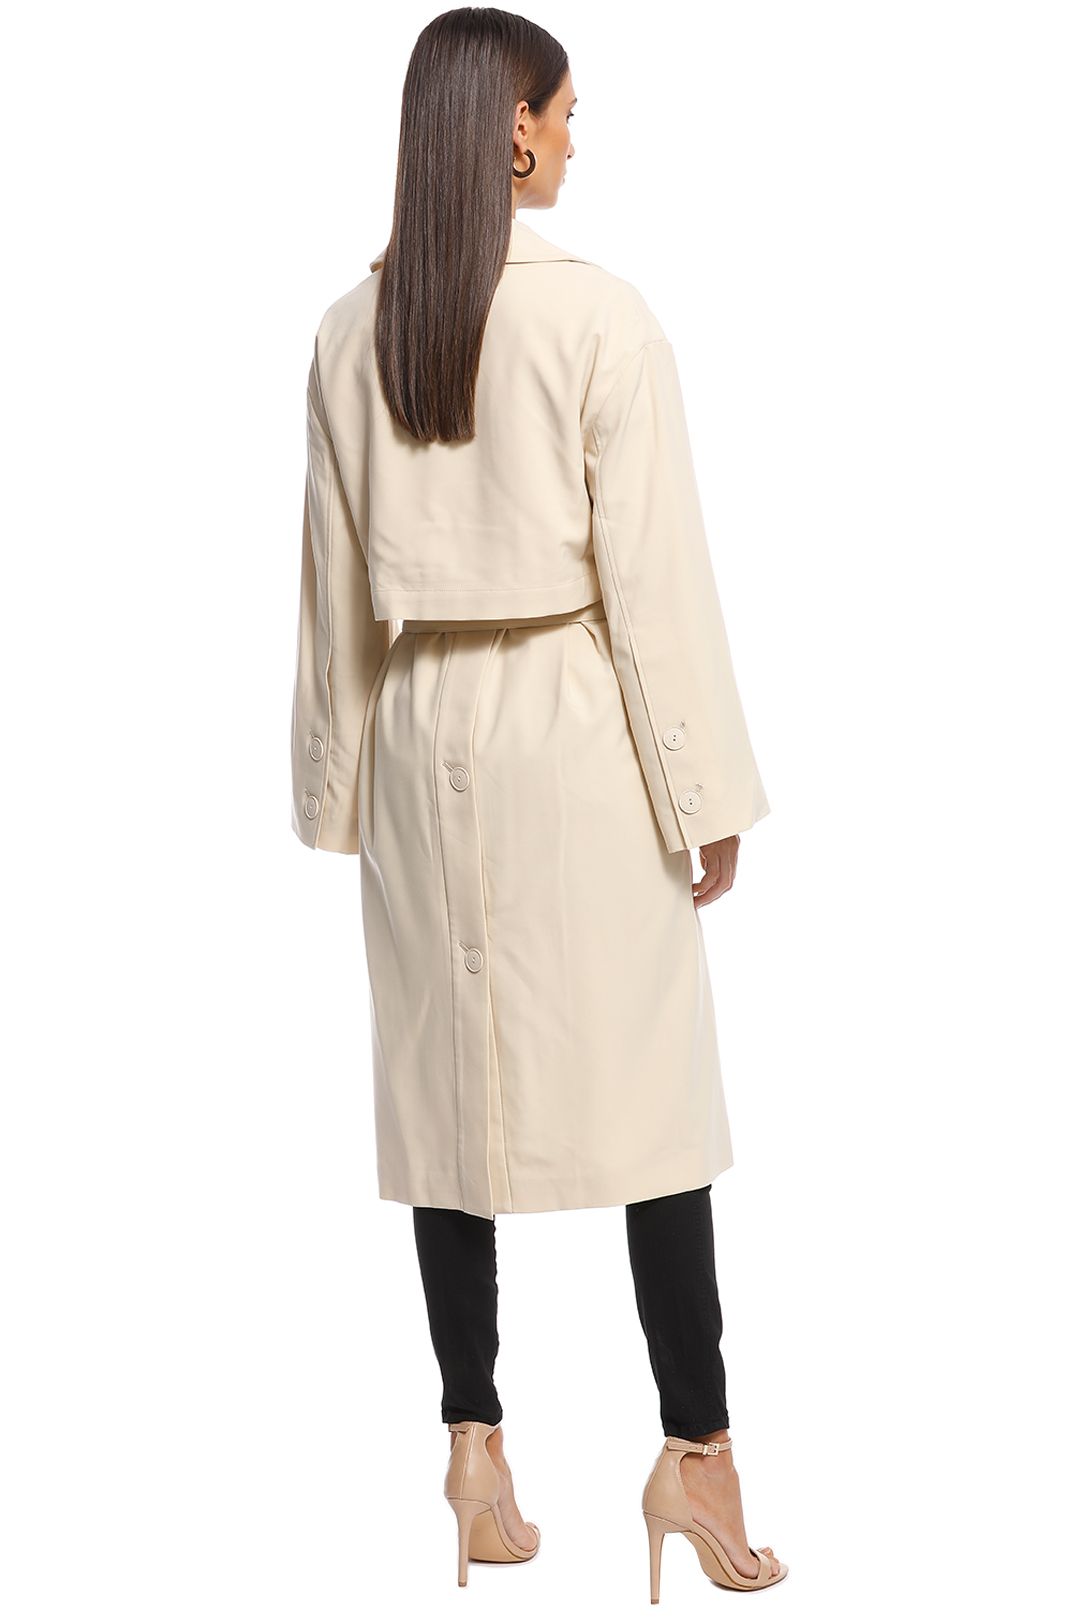 Friend of Audrey - Emerson Oversized Trench Coat - Sand - Back